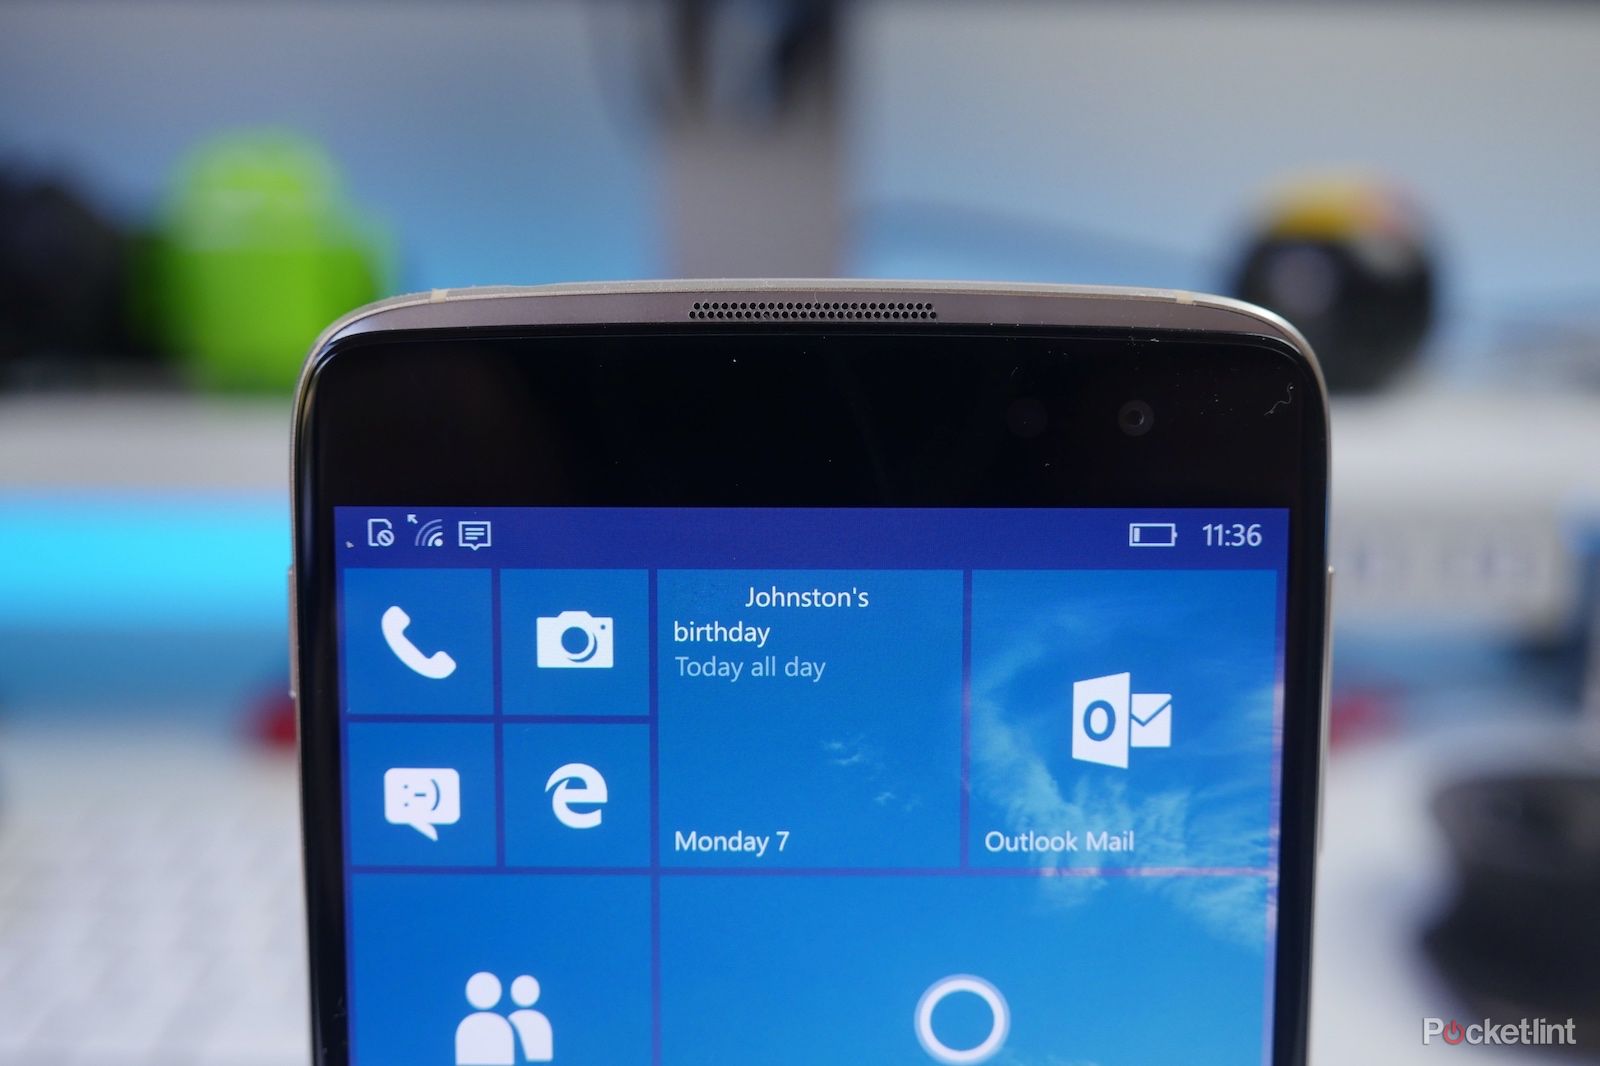 alcatel idol 4s with windows 10 review image 7